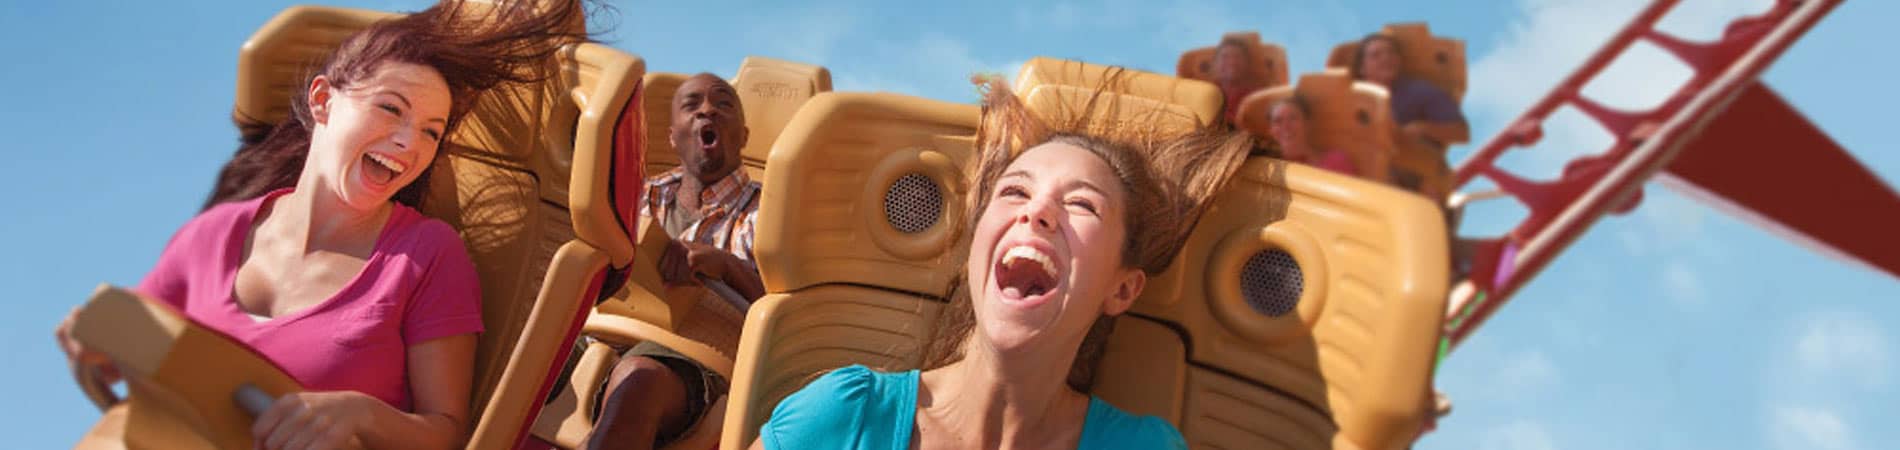 disneyland and universal studios vacation packages